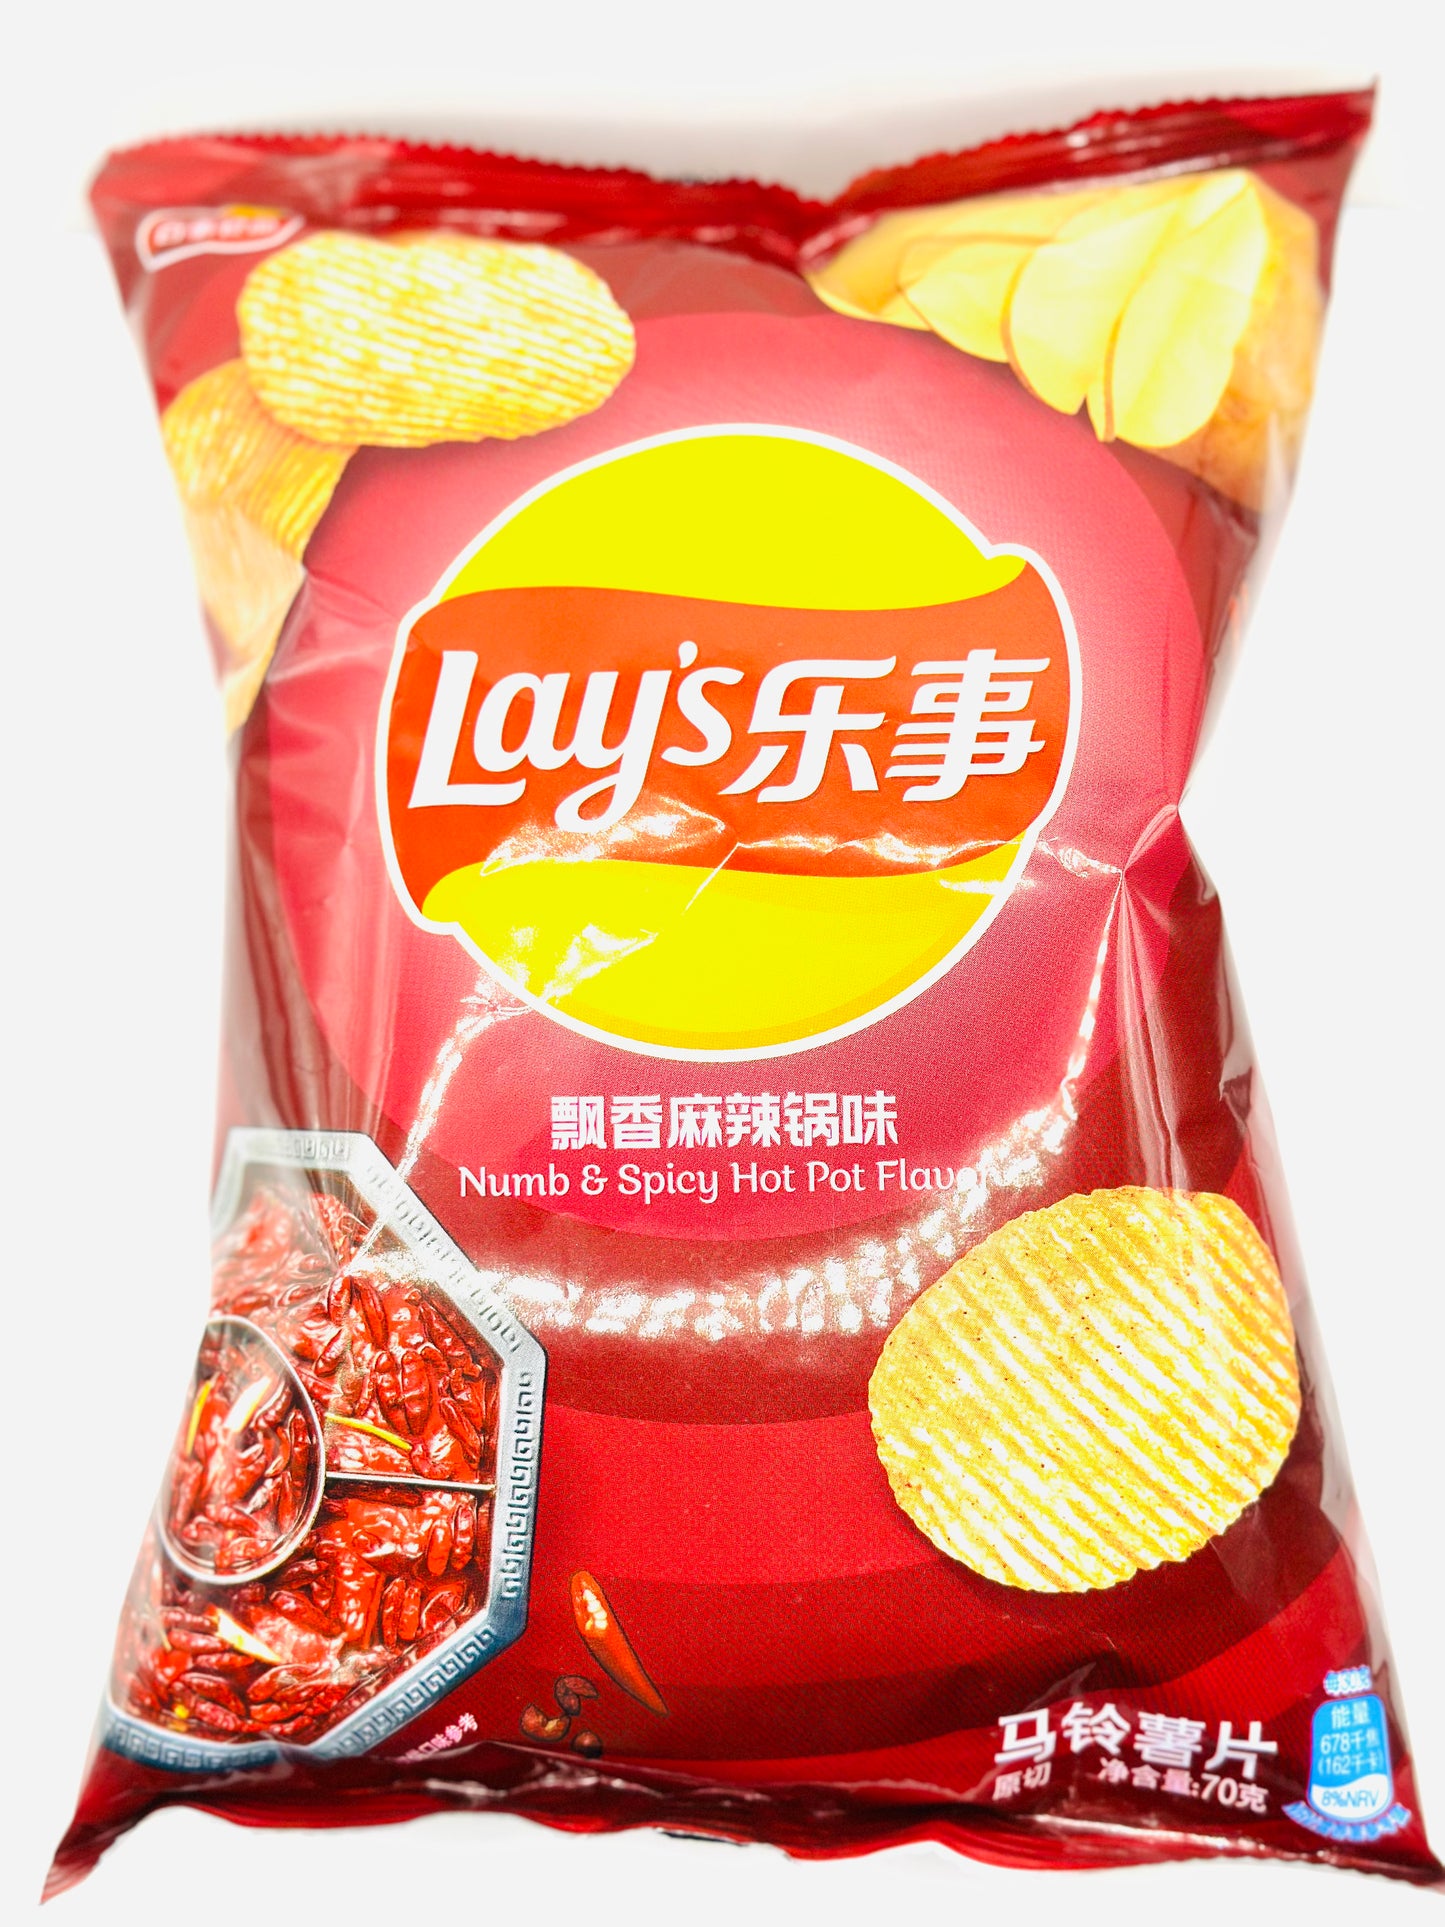 Lay’s Numb and Spicy Hot Pot Flavor